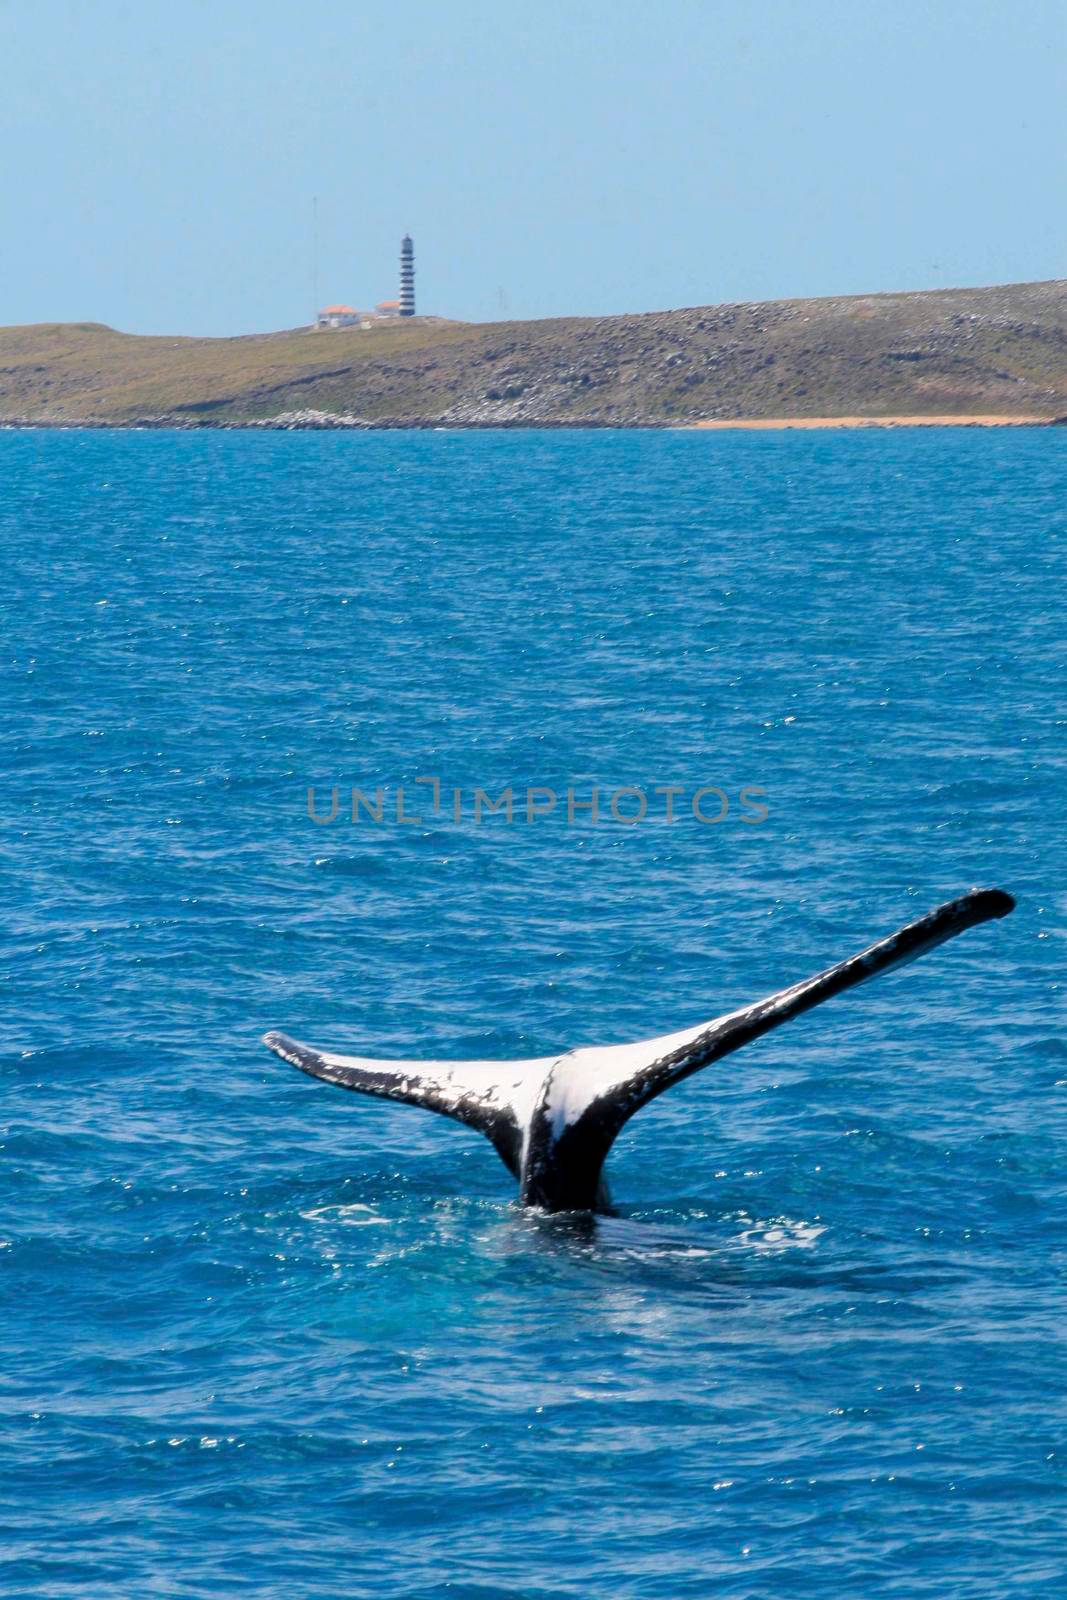 caravelas, bahia / brazil - october 10, 2012: humpback whale tail is seen in the sea in the caravelas region, southern Bahia.
